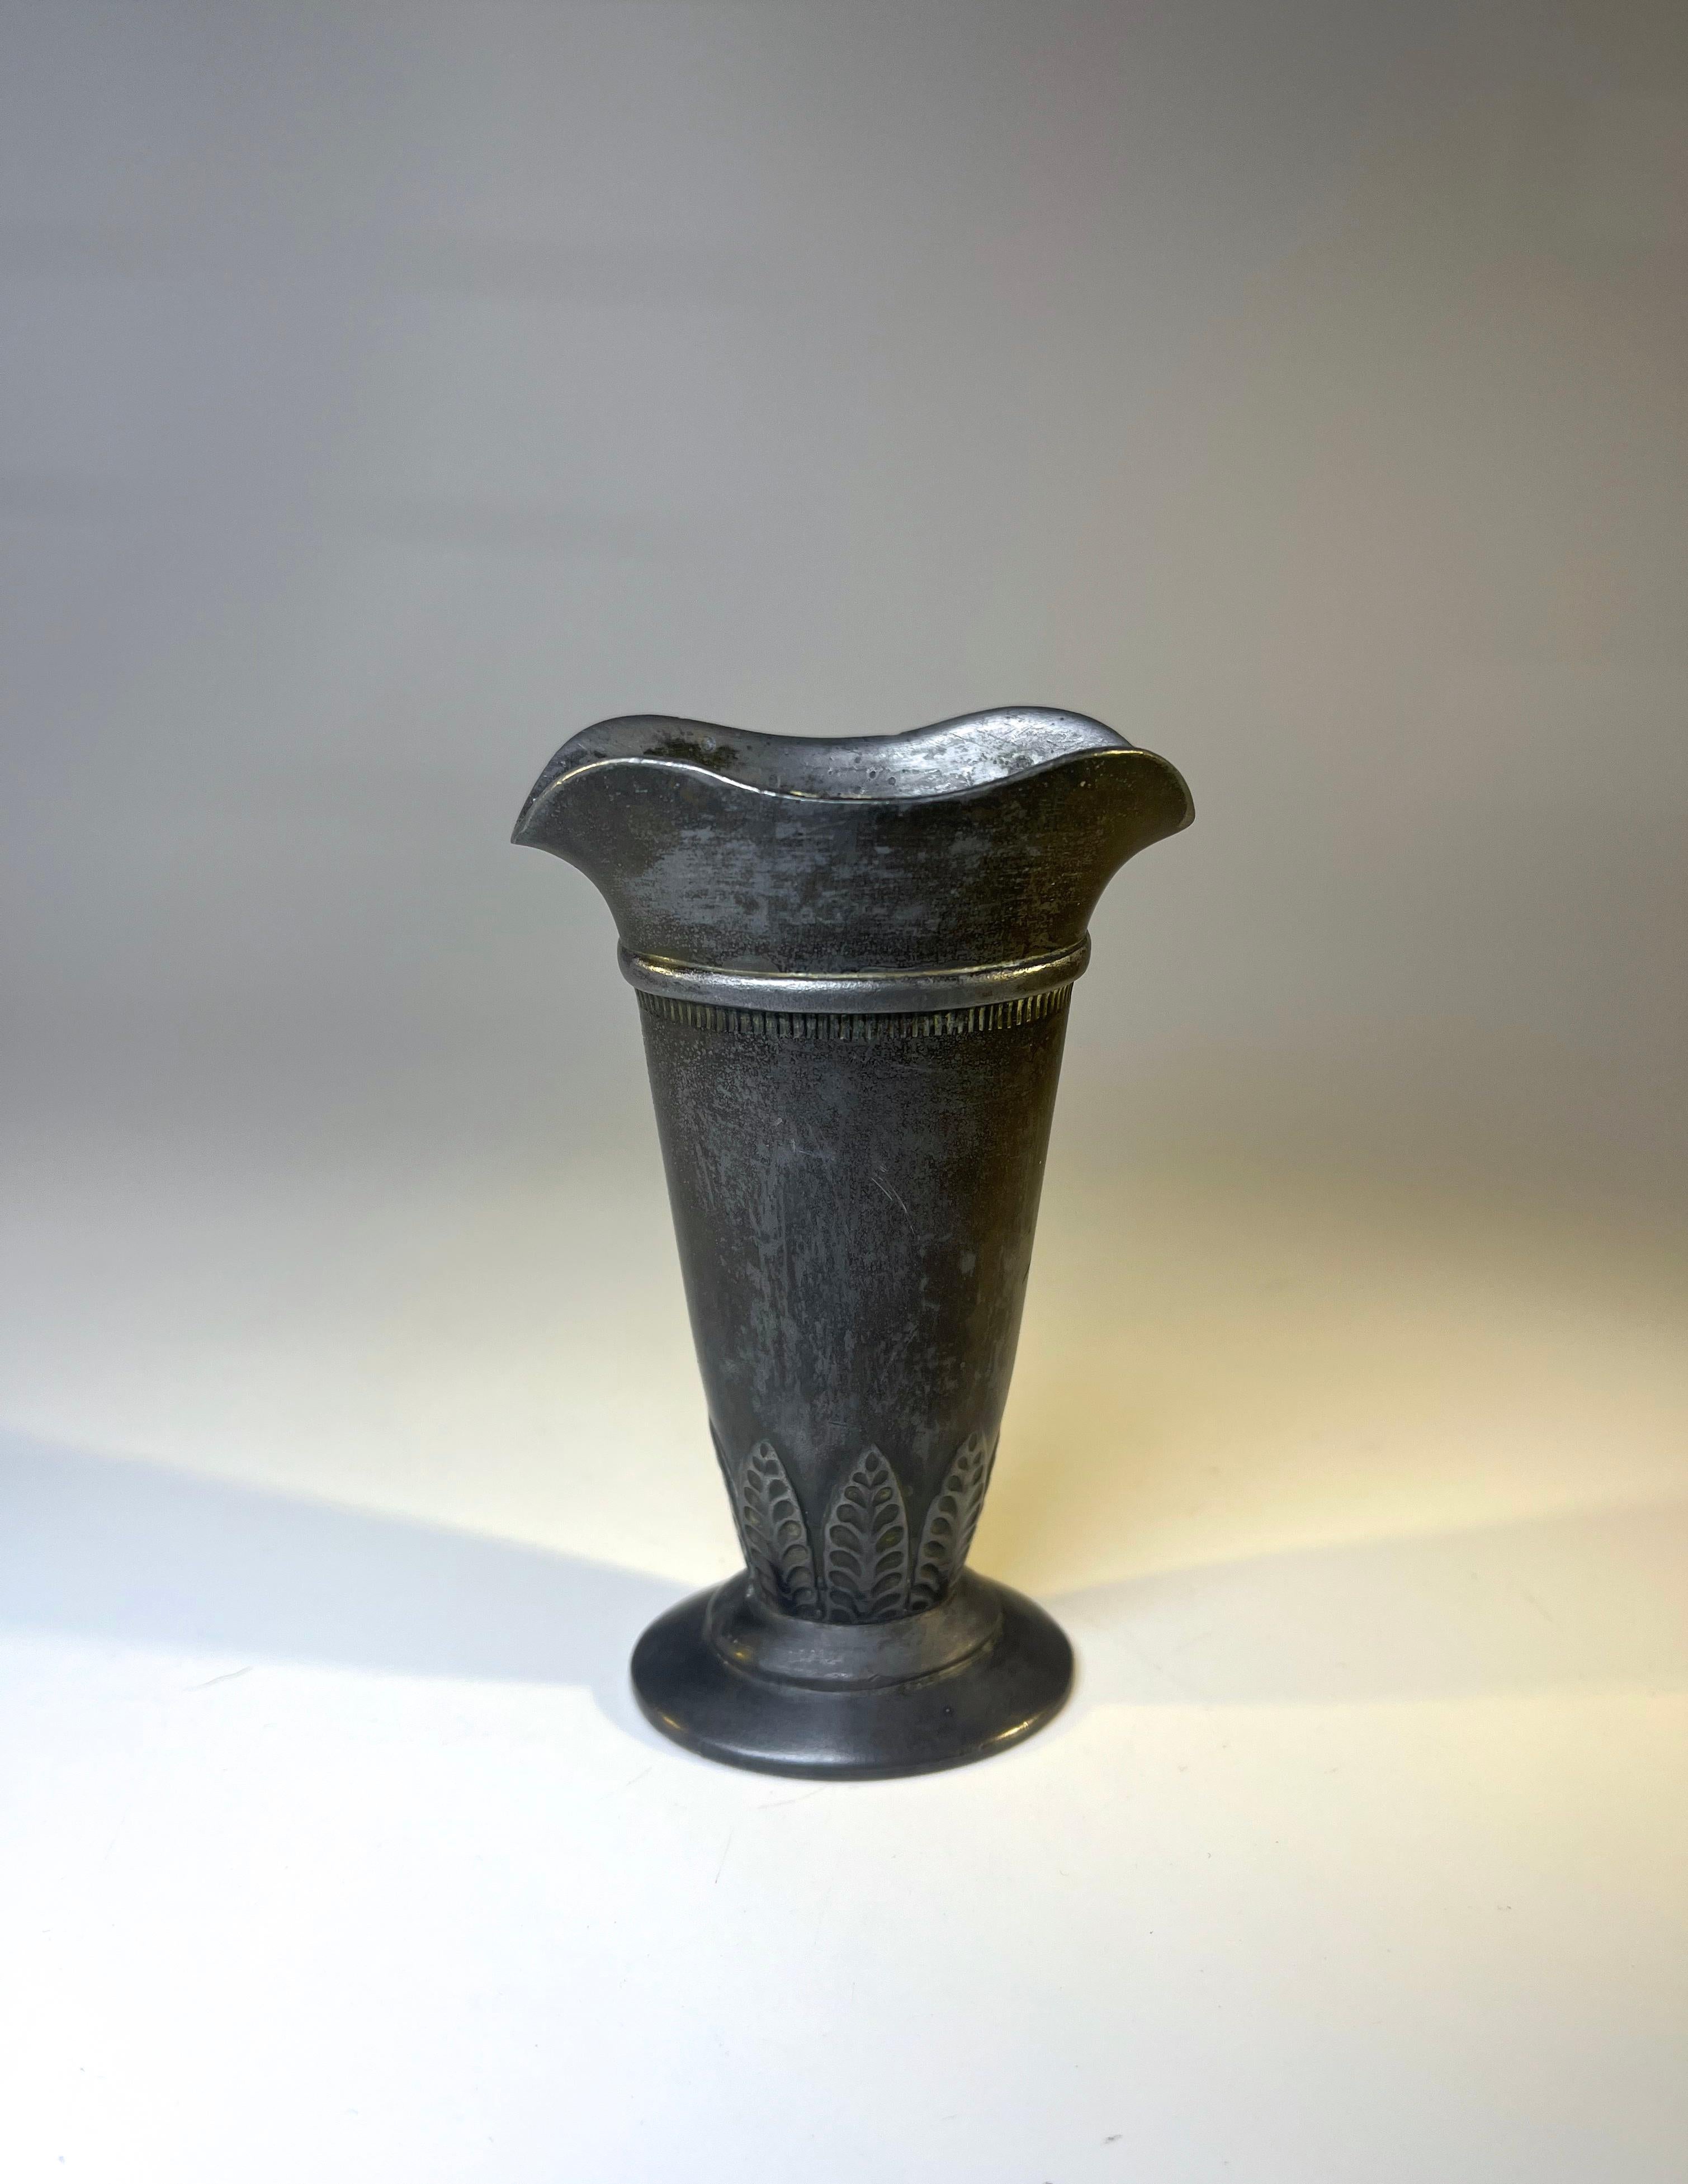 Pure in design, a super little flower vase made of Disko metal by Just Andersen of Denmark
Delicate shape and decorated at base with stylised leaves
Stamped and numbered D55 to base
Circa 1930's
Height 3.75 inch, Width 2.5 inch, Depth 1.4